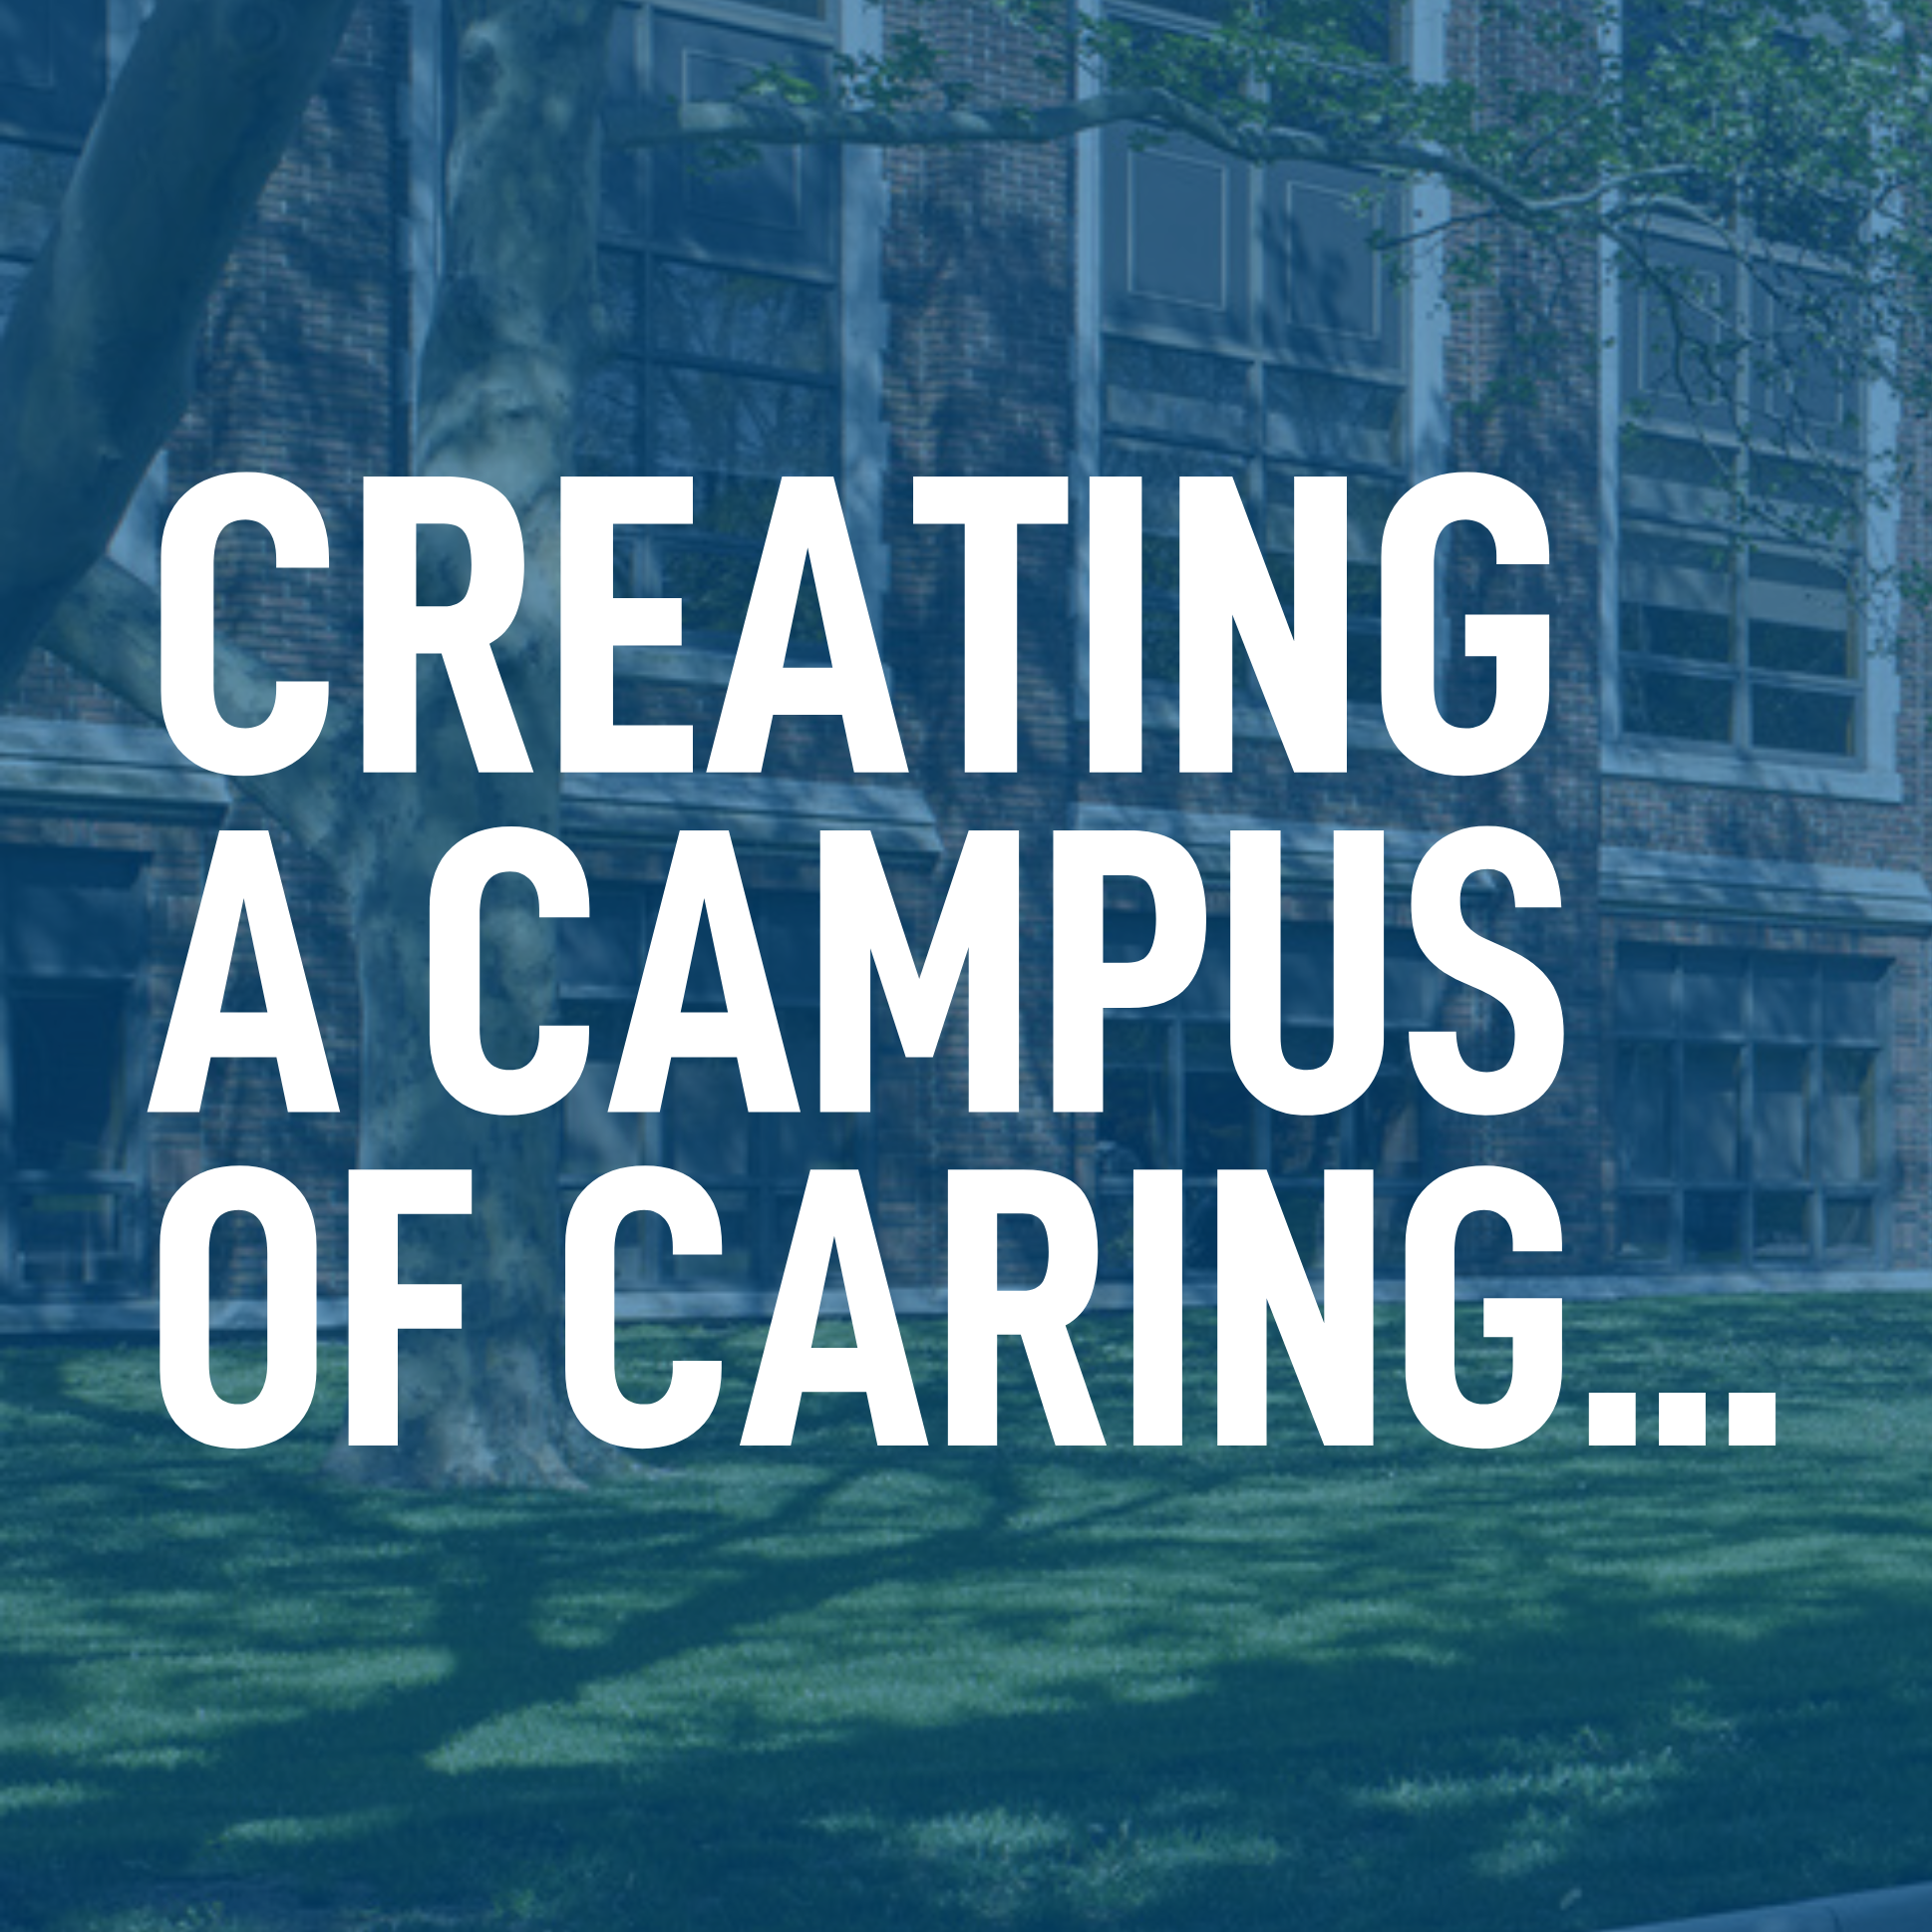 An image of Dillon Hall with the text "Creating a campus of caring" written on top of the image.